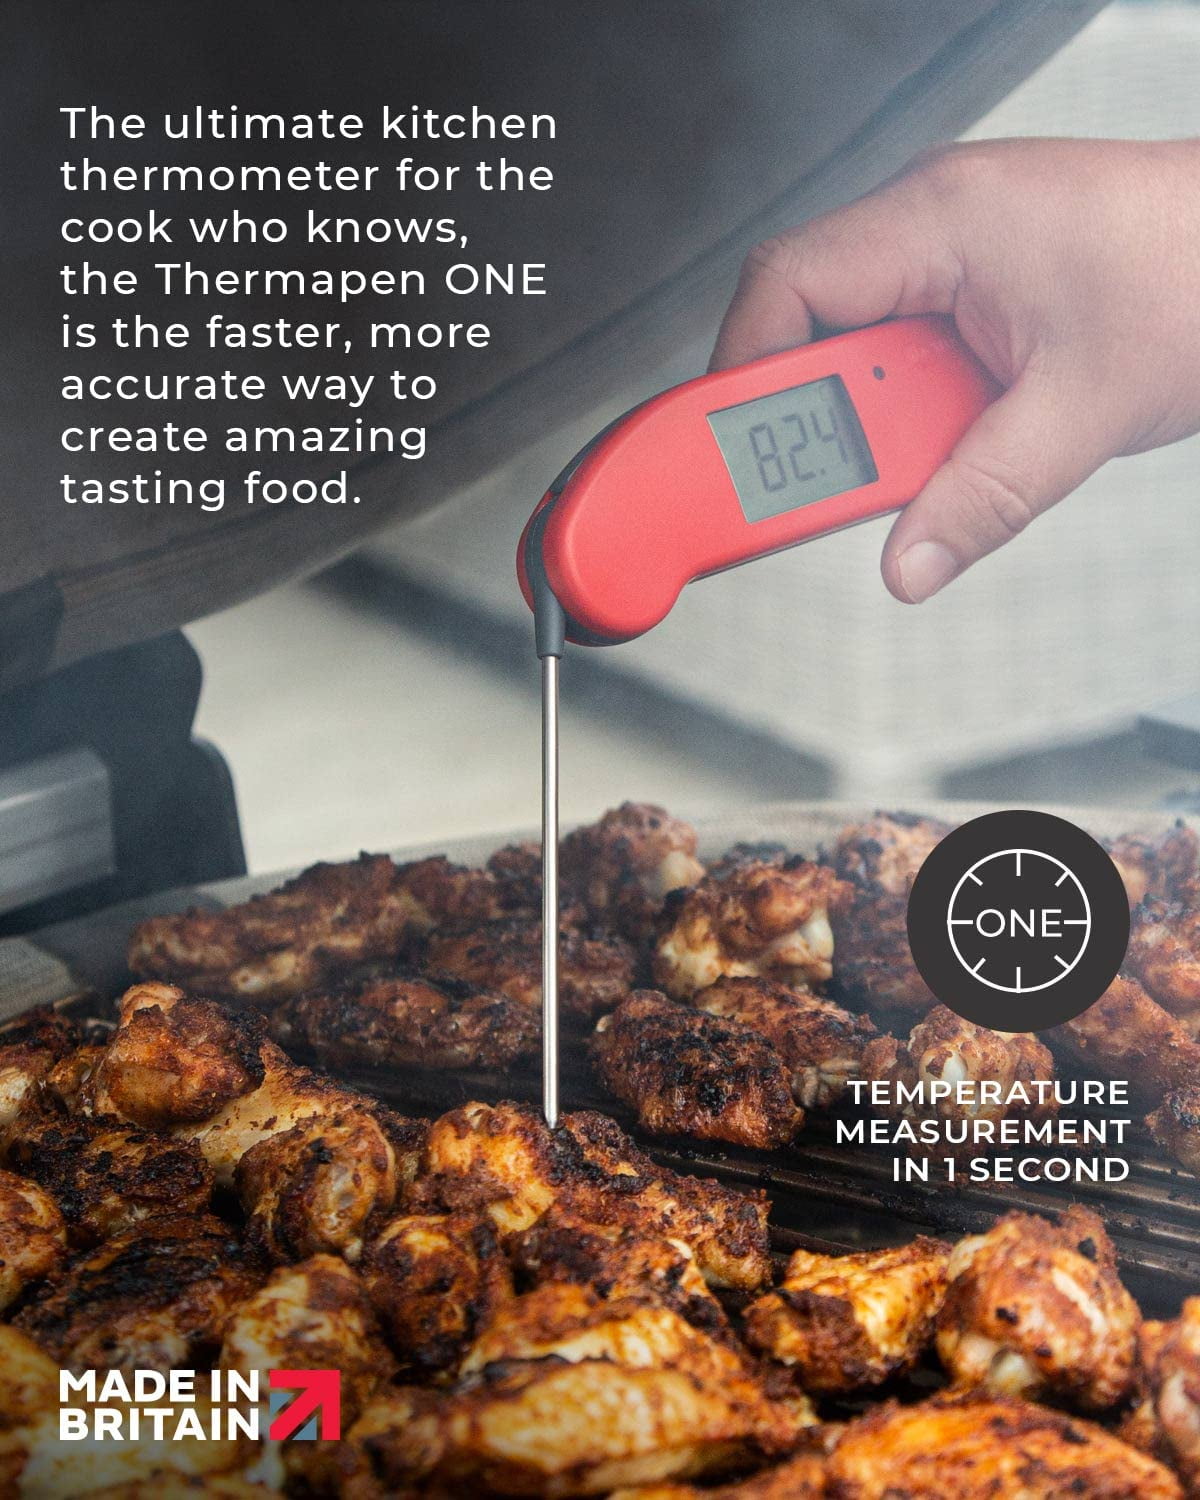 Waterproof Thermapen One | One Second Instant Read Meat Cooking Thermometer | Auto-Rotating Display, Waterproof | White | ThermoWorks